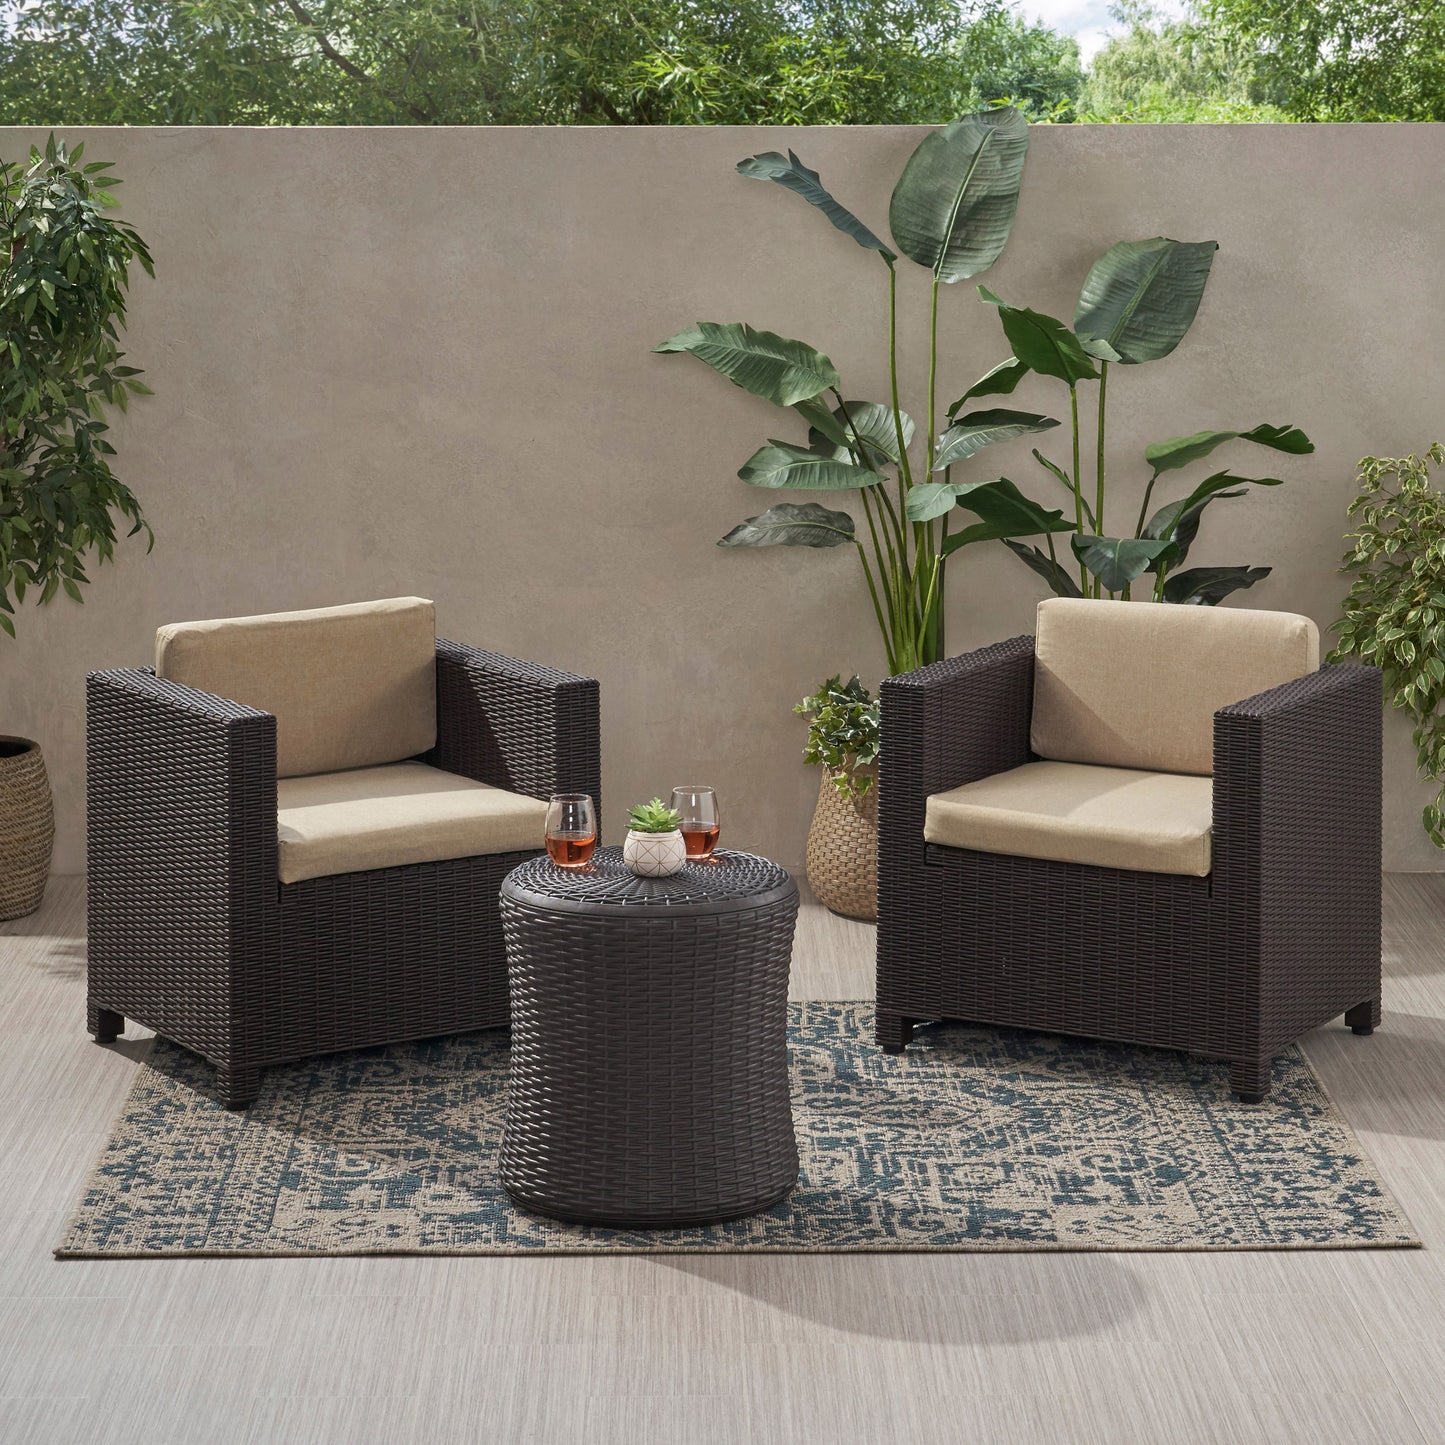 Iven Outdoor 2 Seater Faux Wicker Chat Set with Cushions